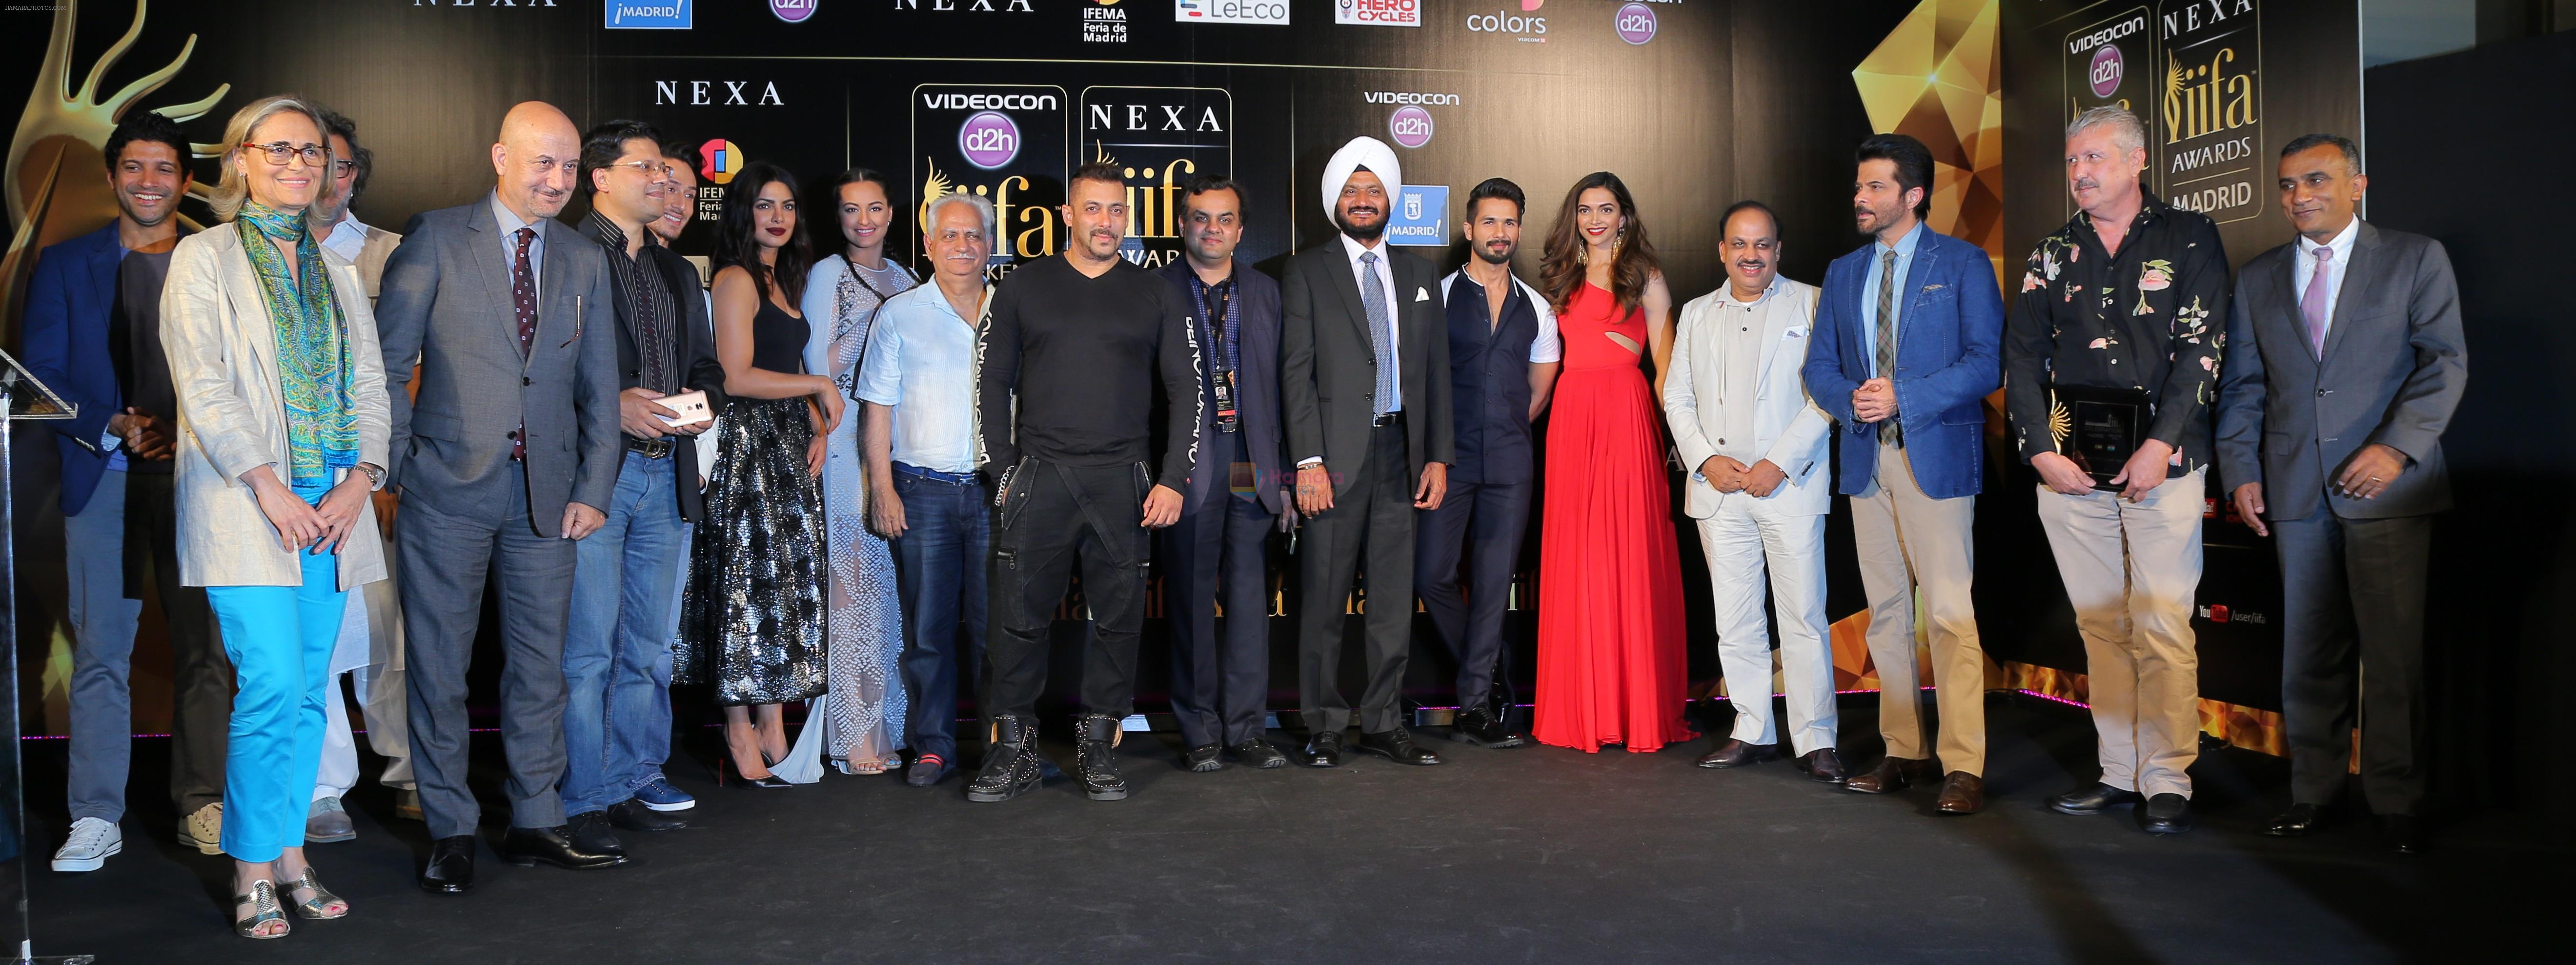 Noted Dignitaries and Friends of IIFA At The IIFA 2016 Opening Press Conference In Madrid